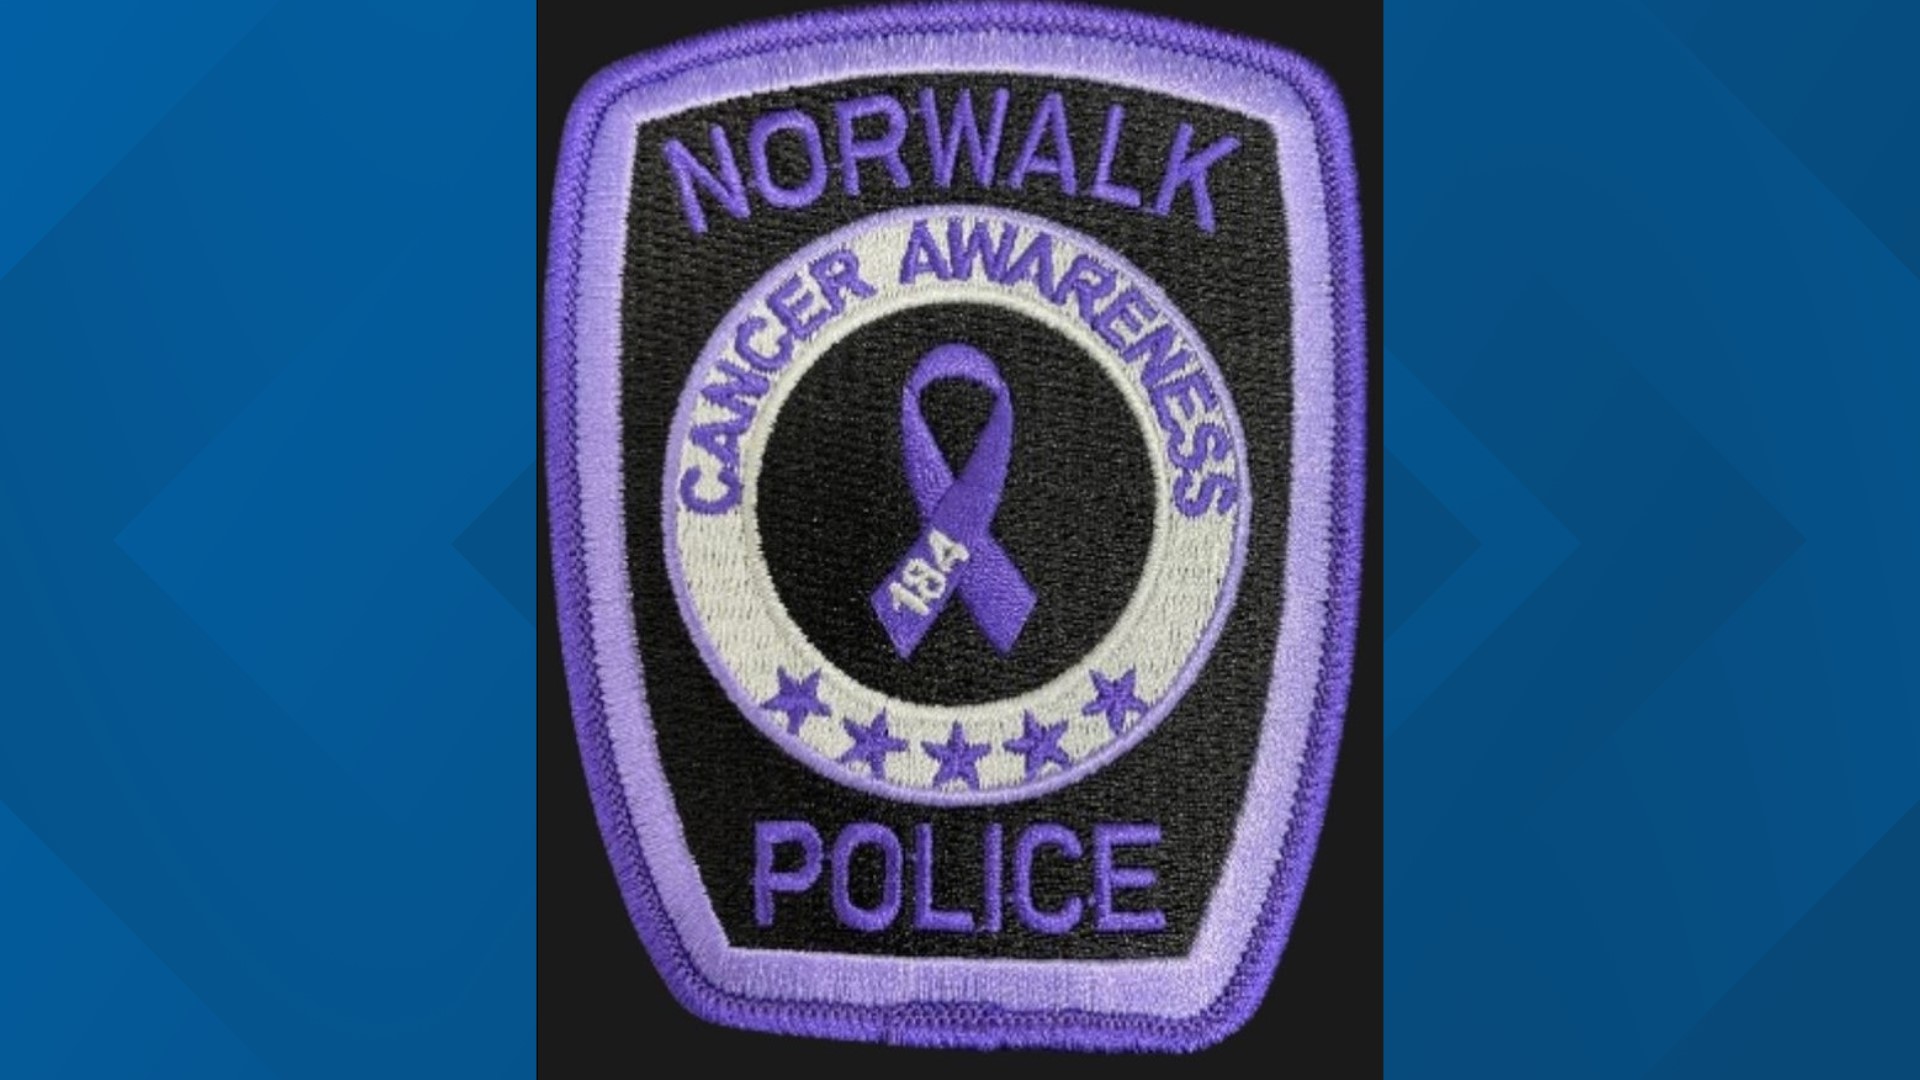 Many Facebook profiles now show the purple ribbon badge in honor of Ofc. Jayson Spurr, who lost his battle to pancreatic cancer.